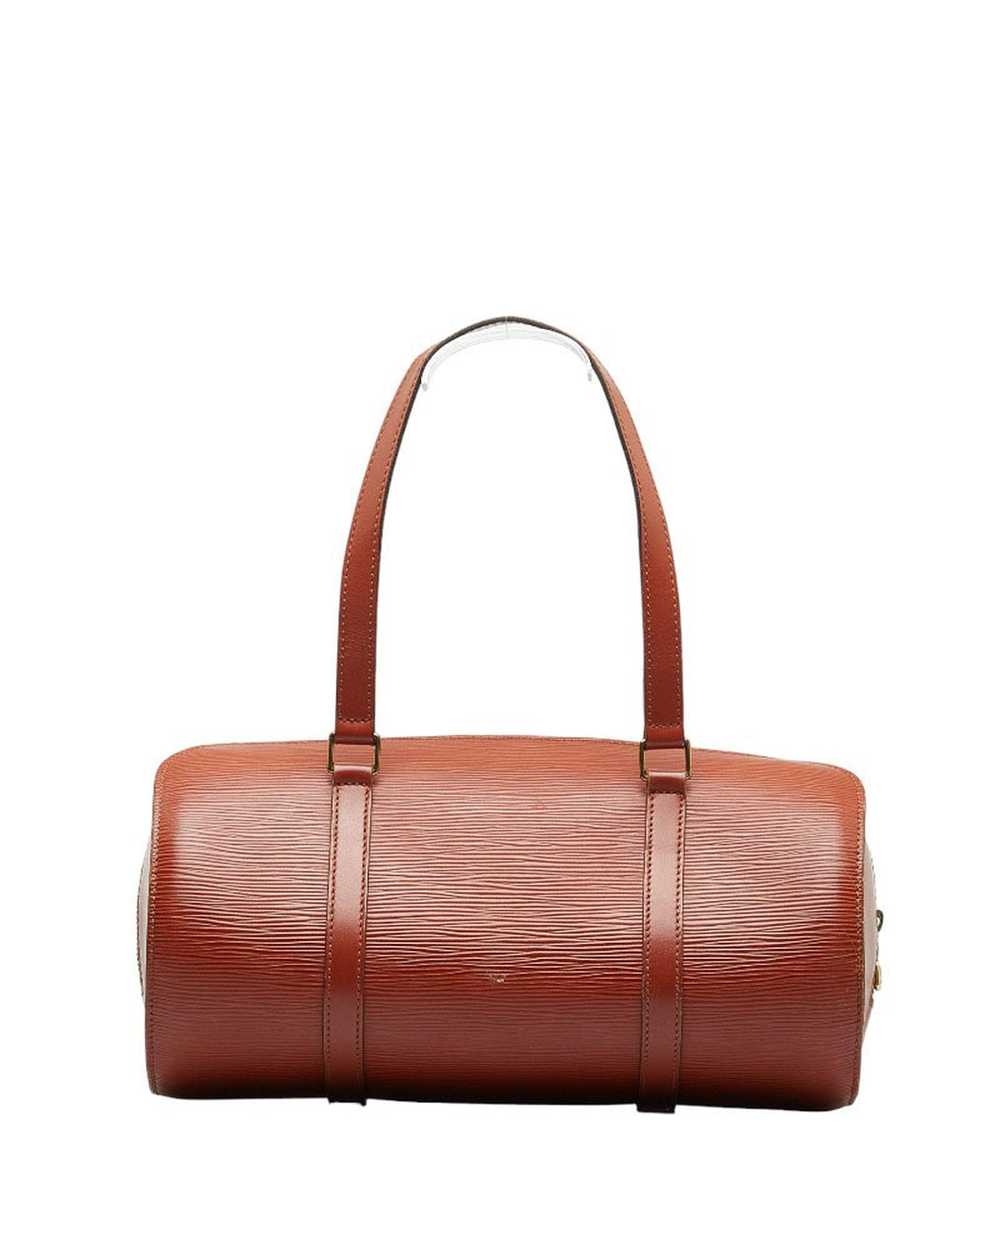 Louis Vuitton Epi Soufflot with Pouch Bag in Brown - image 3